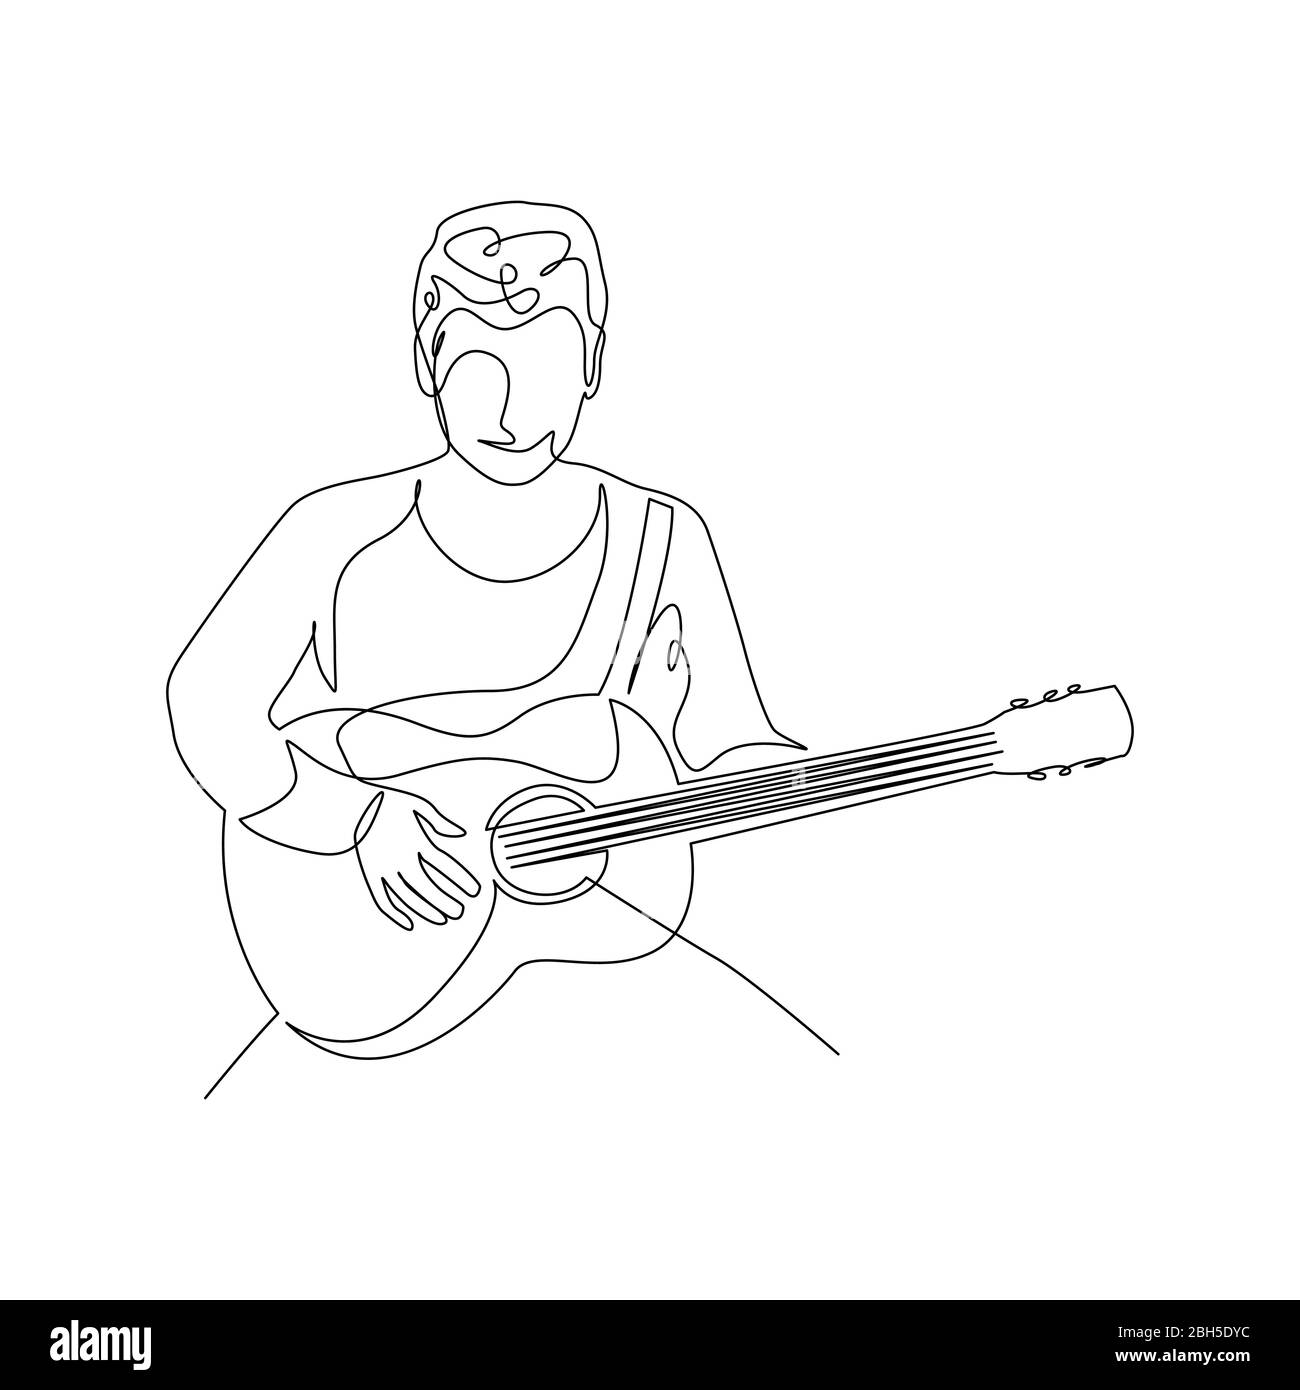 Discover more than 146 guitar player sketch best